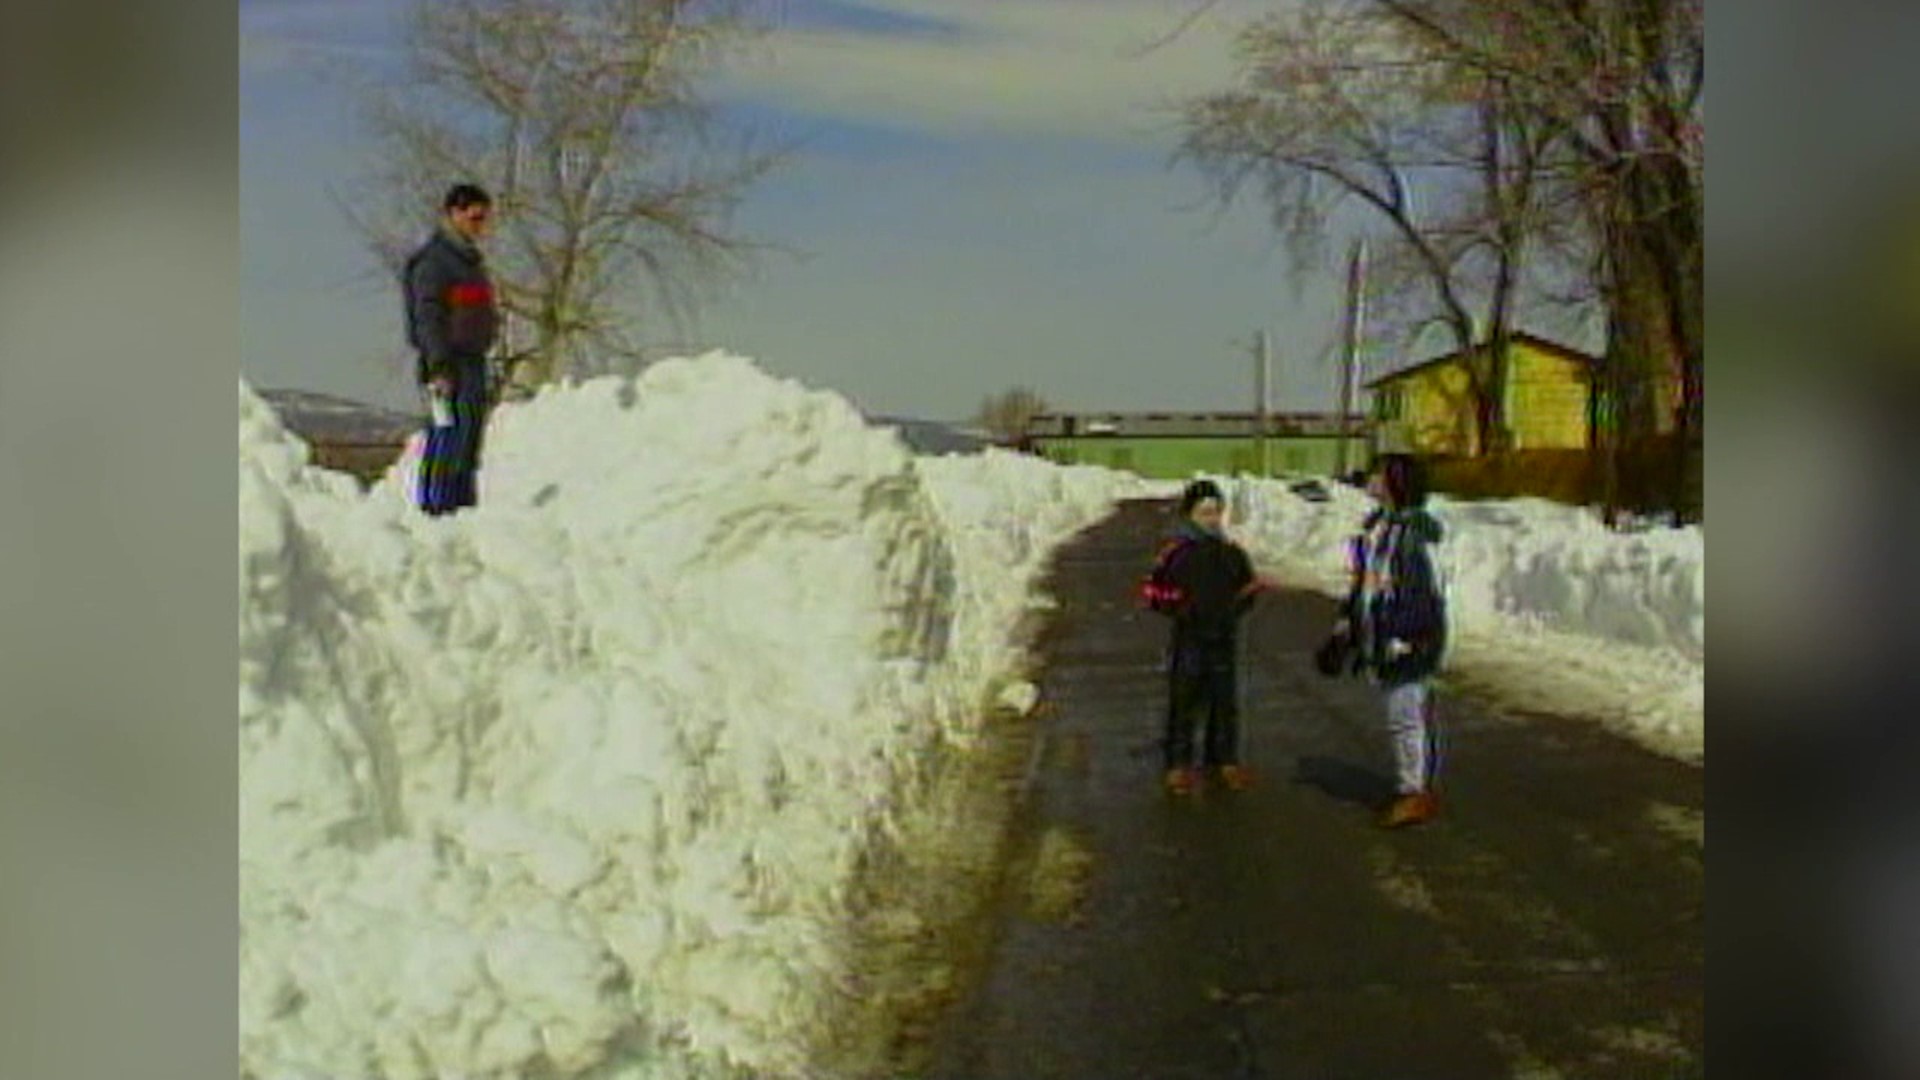 Stormtracker 16 meteorologist Ally Gallo sat down with Scranton's mayor and the head of DPW at the time to talk about the March Blizzard of 1993.